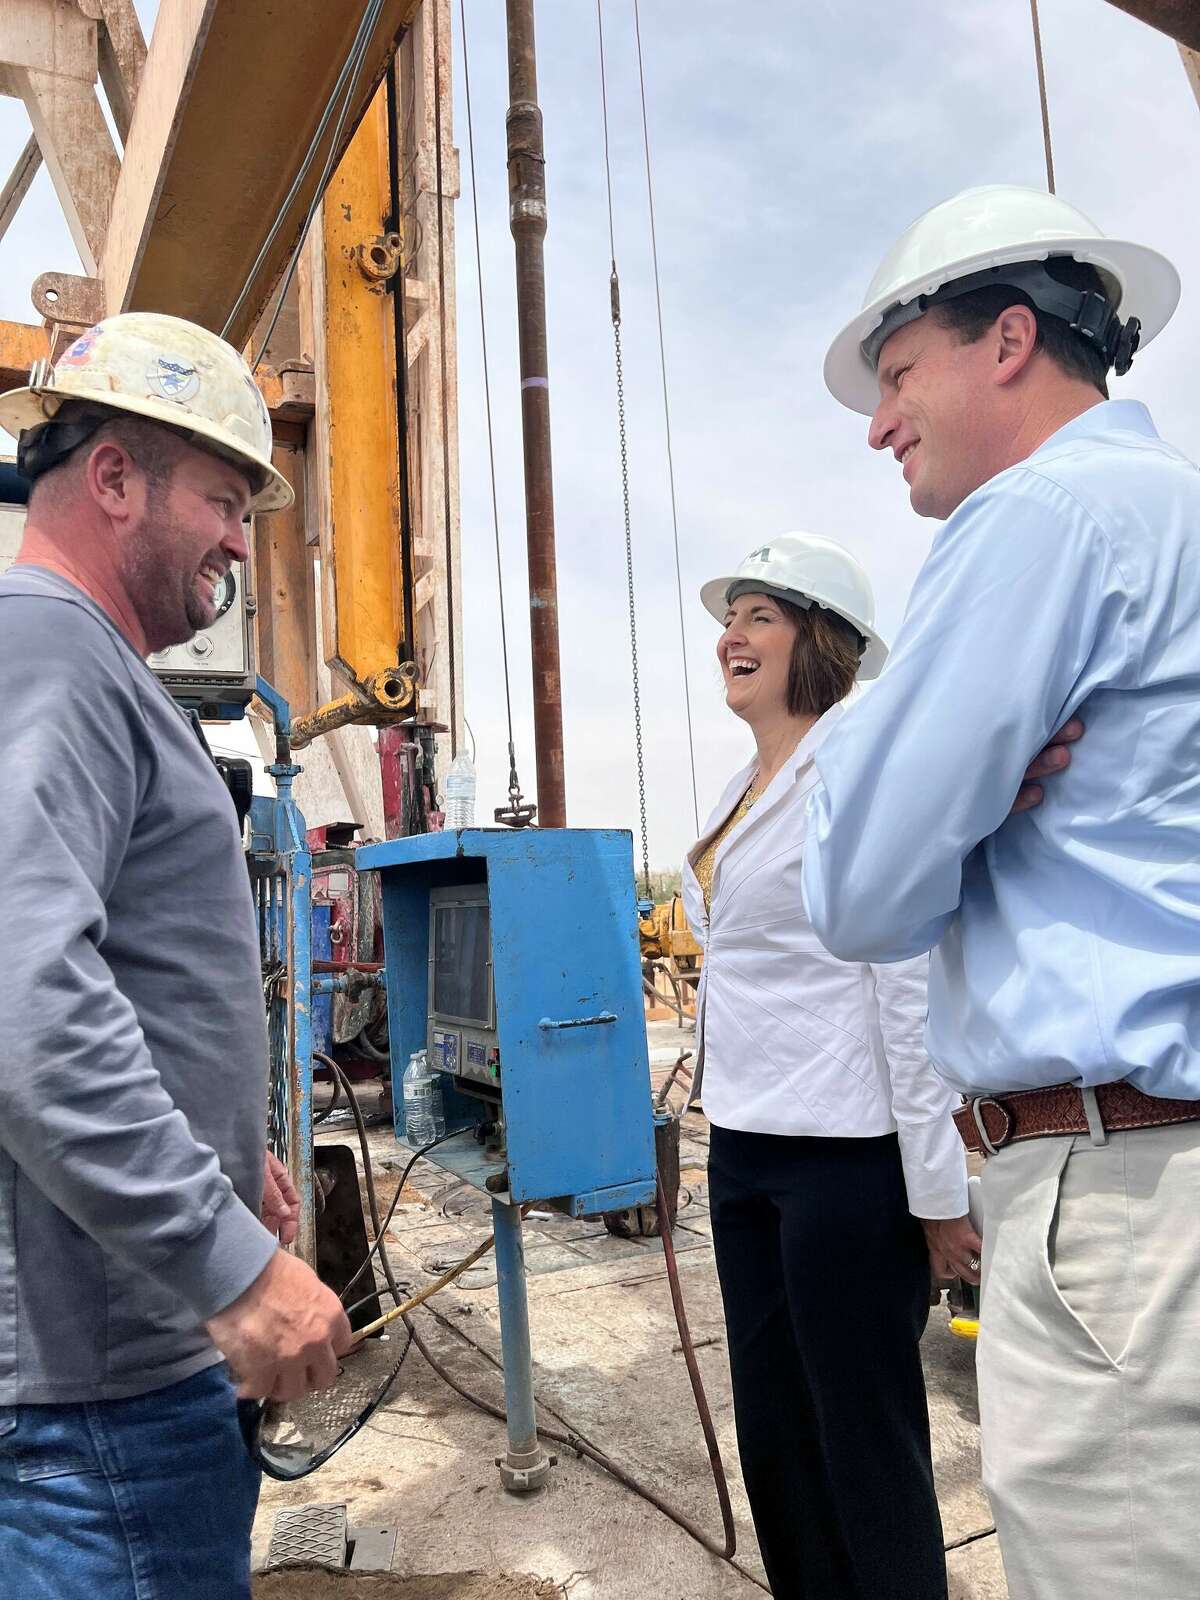 Congressman August Pfluger hosted Cathy McMorris Rodgers, the ranking member on the House Energy and Commerce Committee, for a tour of MCM Energy Partners’ rig in Midland and the Diamondback Energy frac site in Midland County.